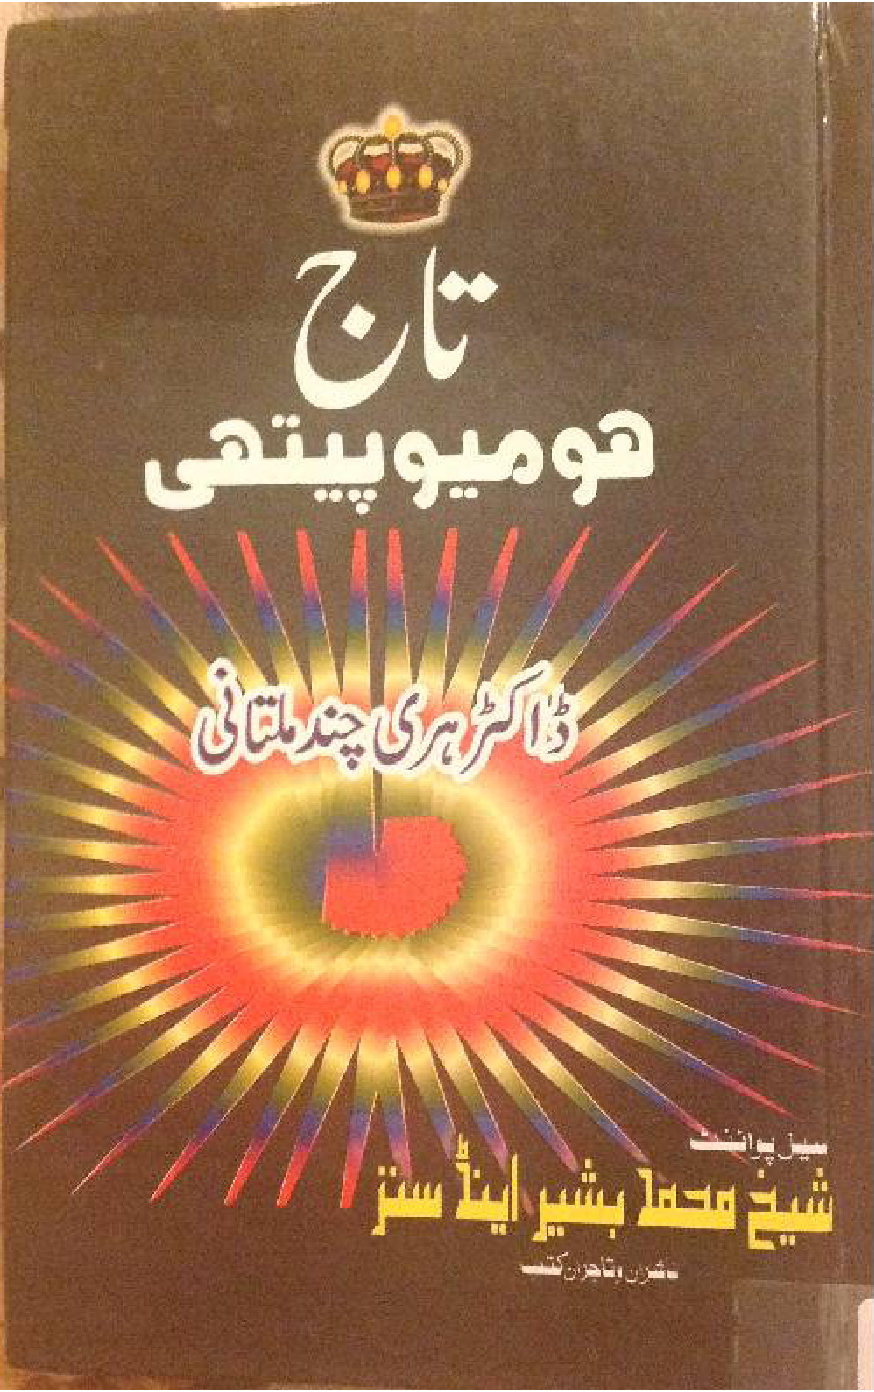 Free Books Store: Homeopathic Book In Urdu by Dr Hari Chand Multani